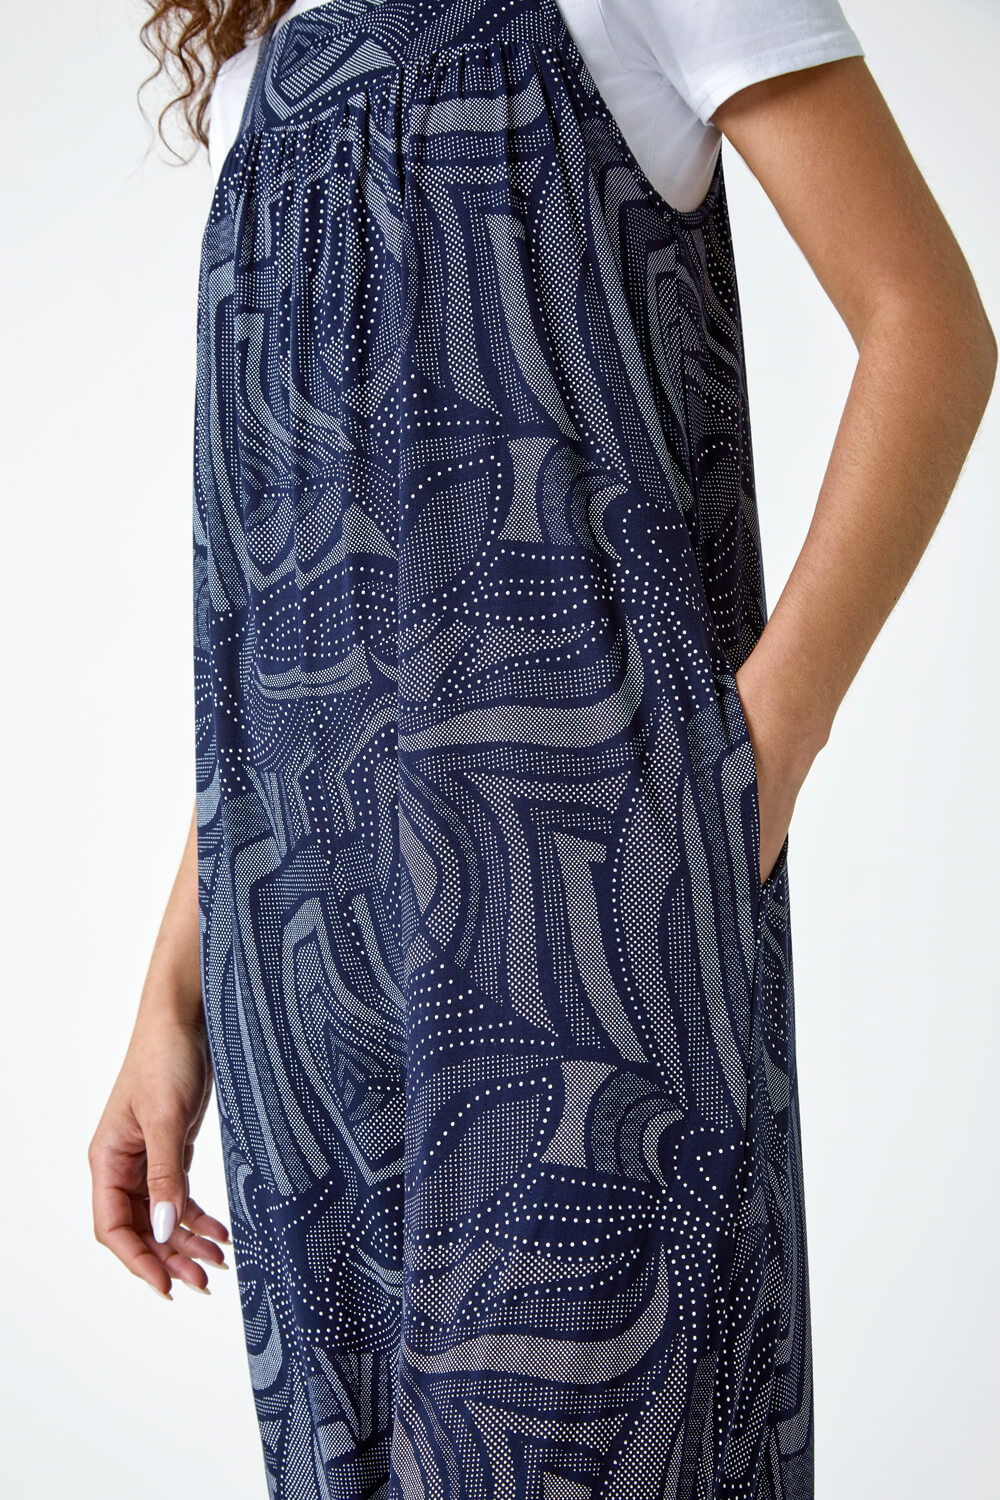 Navy  Abstract Print Pocket Stretch Jumpsuit, Image 5 of 5